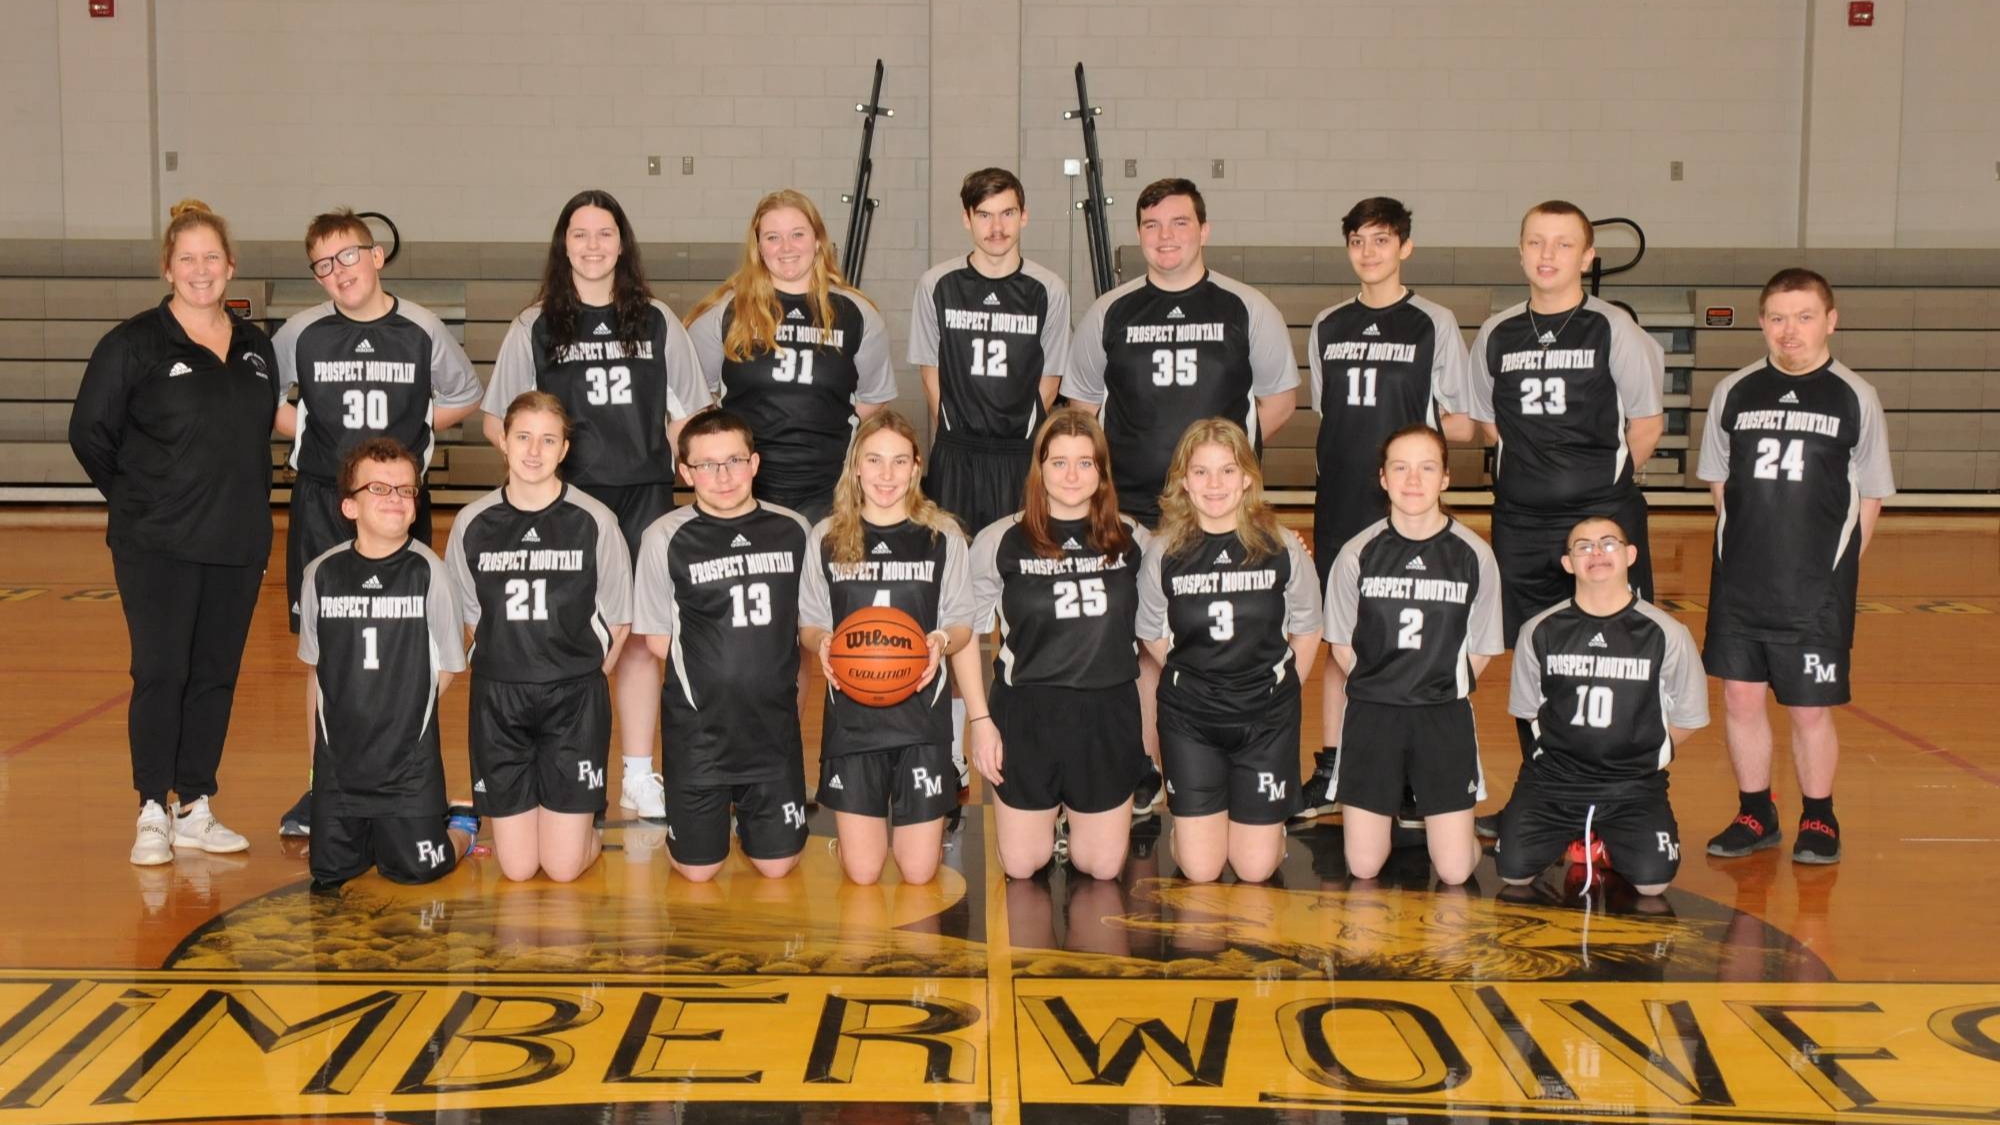 PMHS Unified Basketball Team